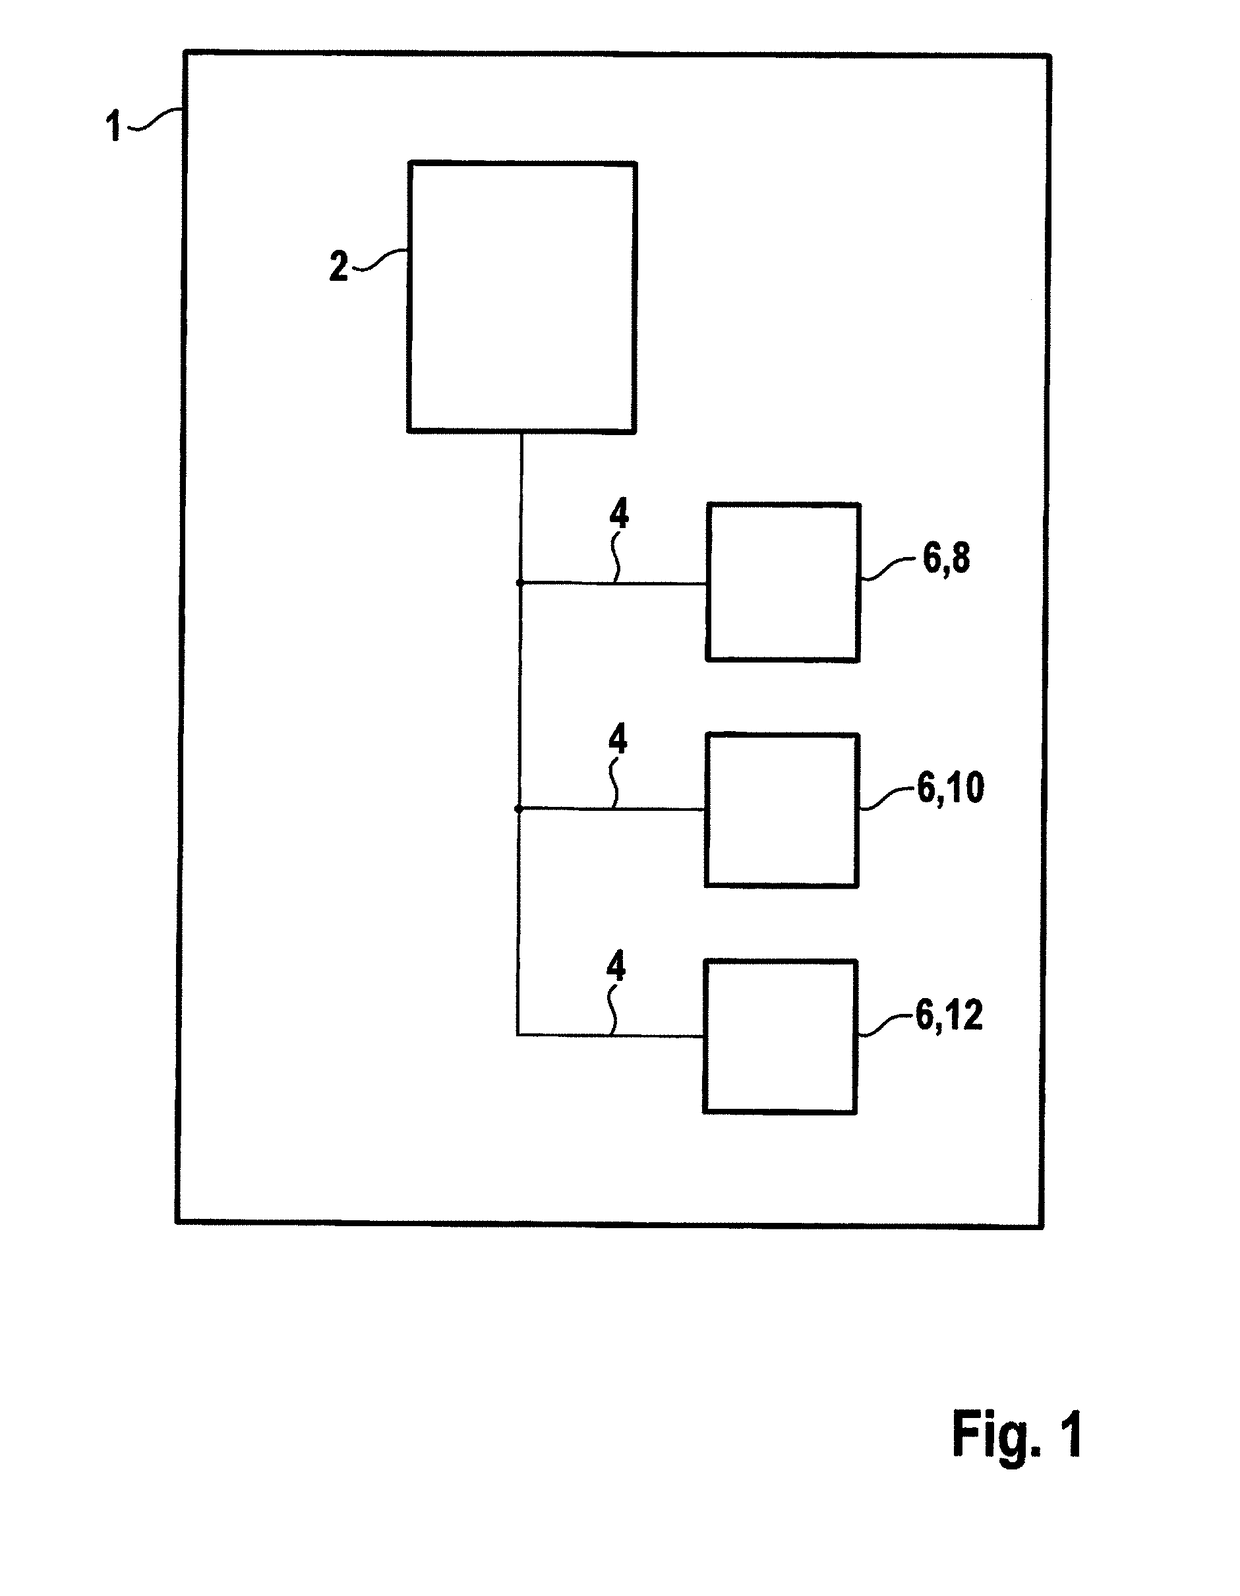 Method for adjusting time stamps during the acquisition of sensor data